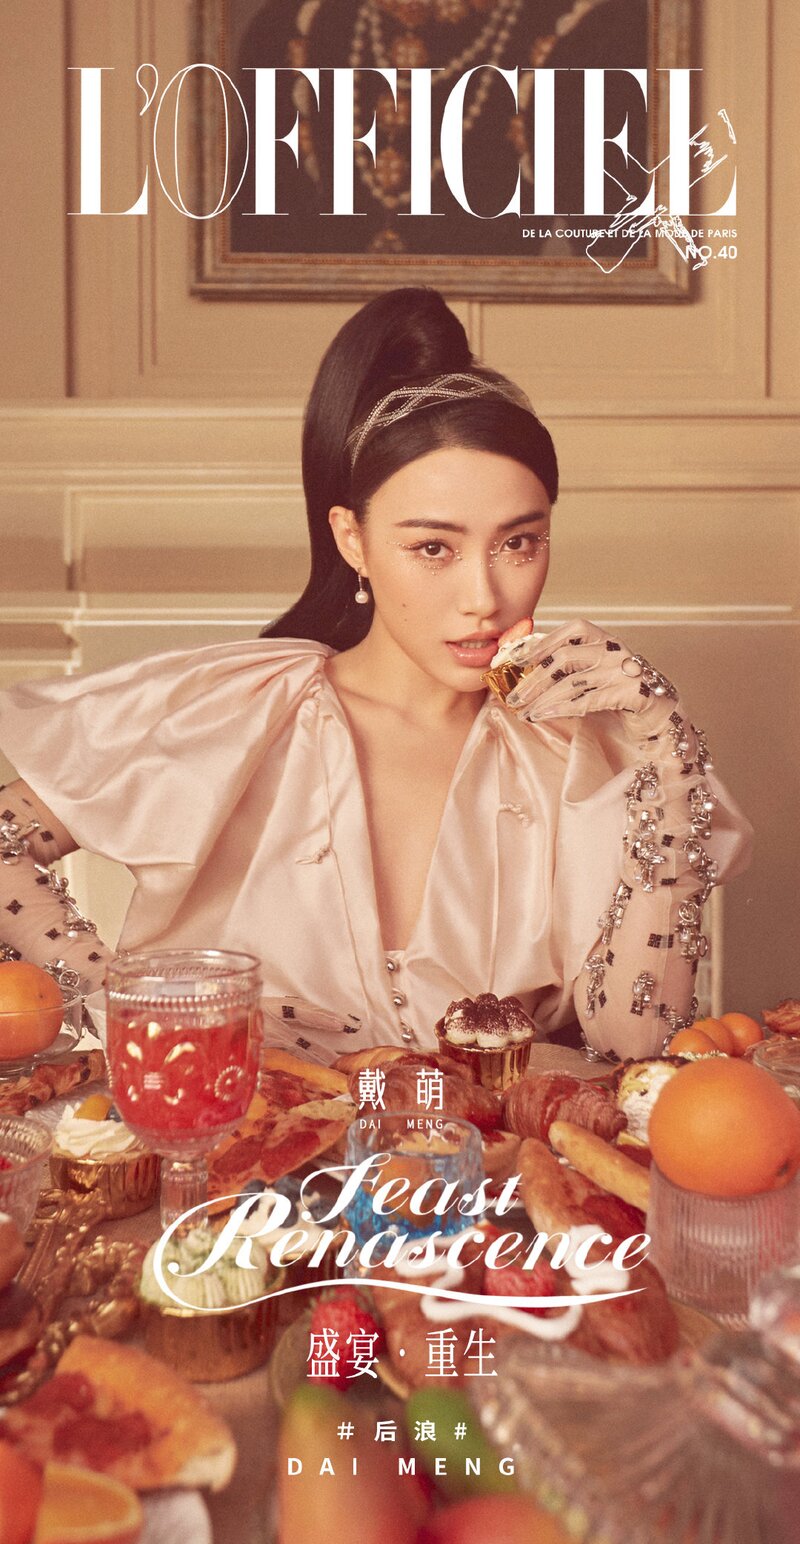 Dai Meng for L'OFFICIEL China 'Feast' June 2021 Issue documents 1